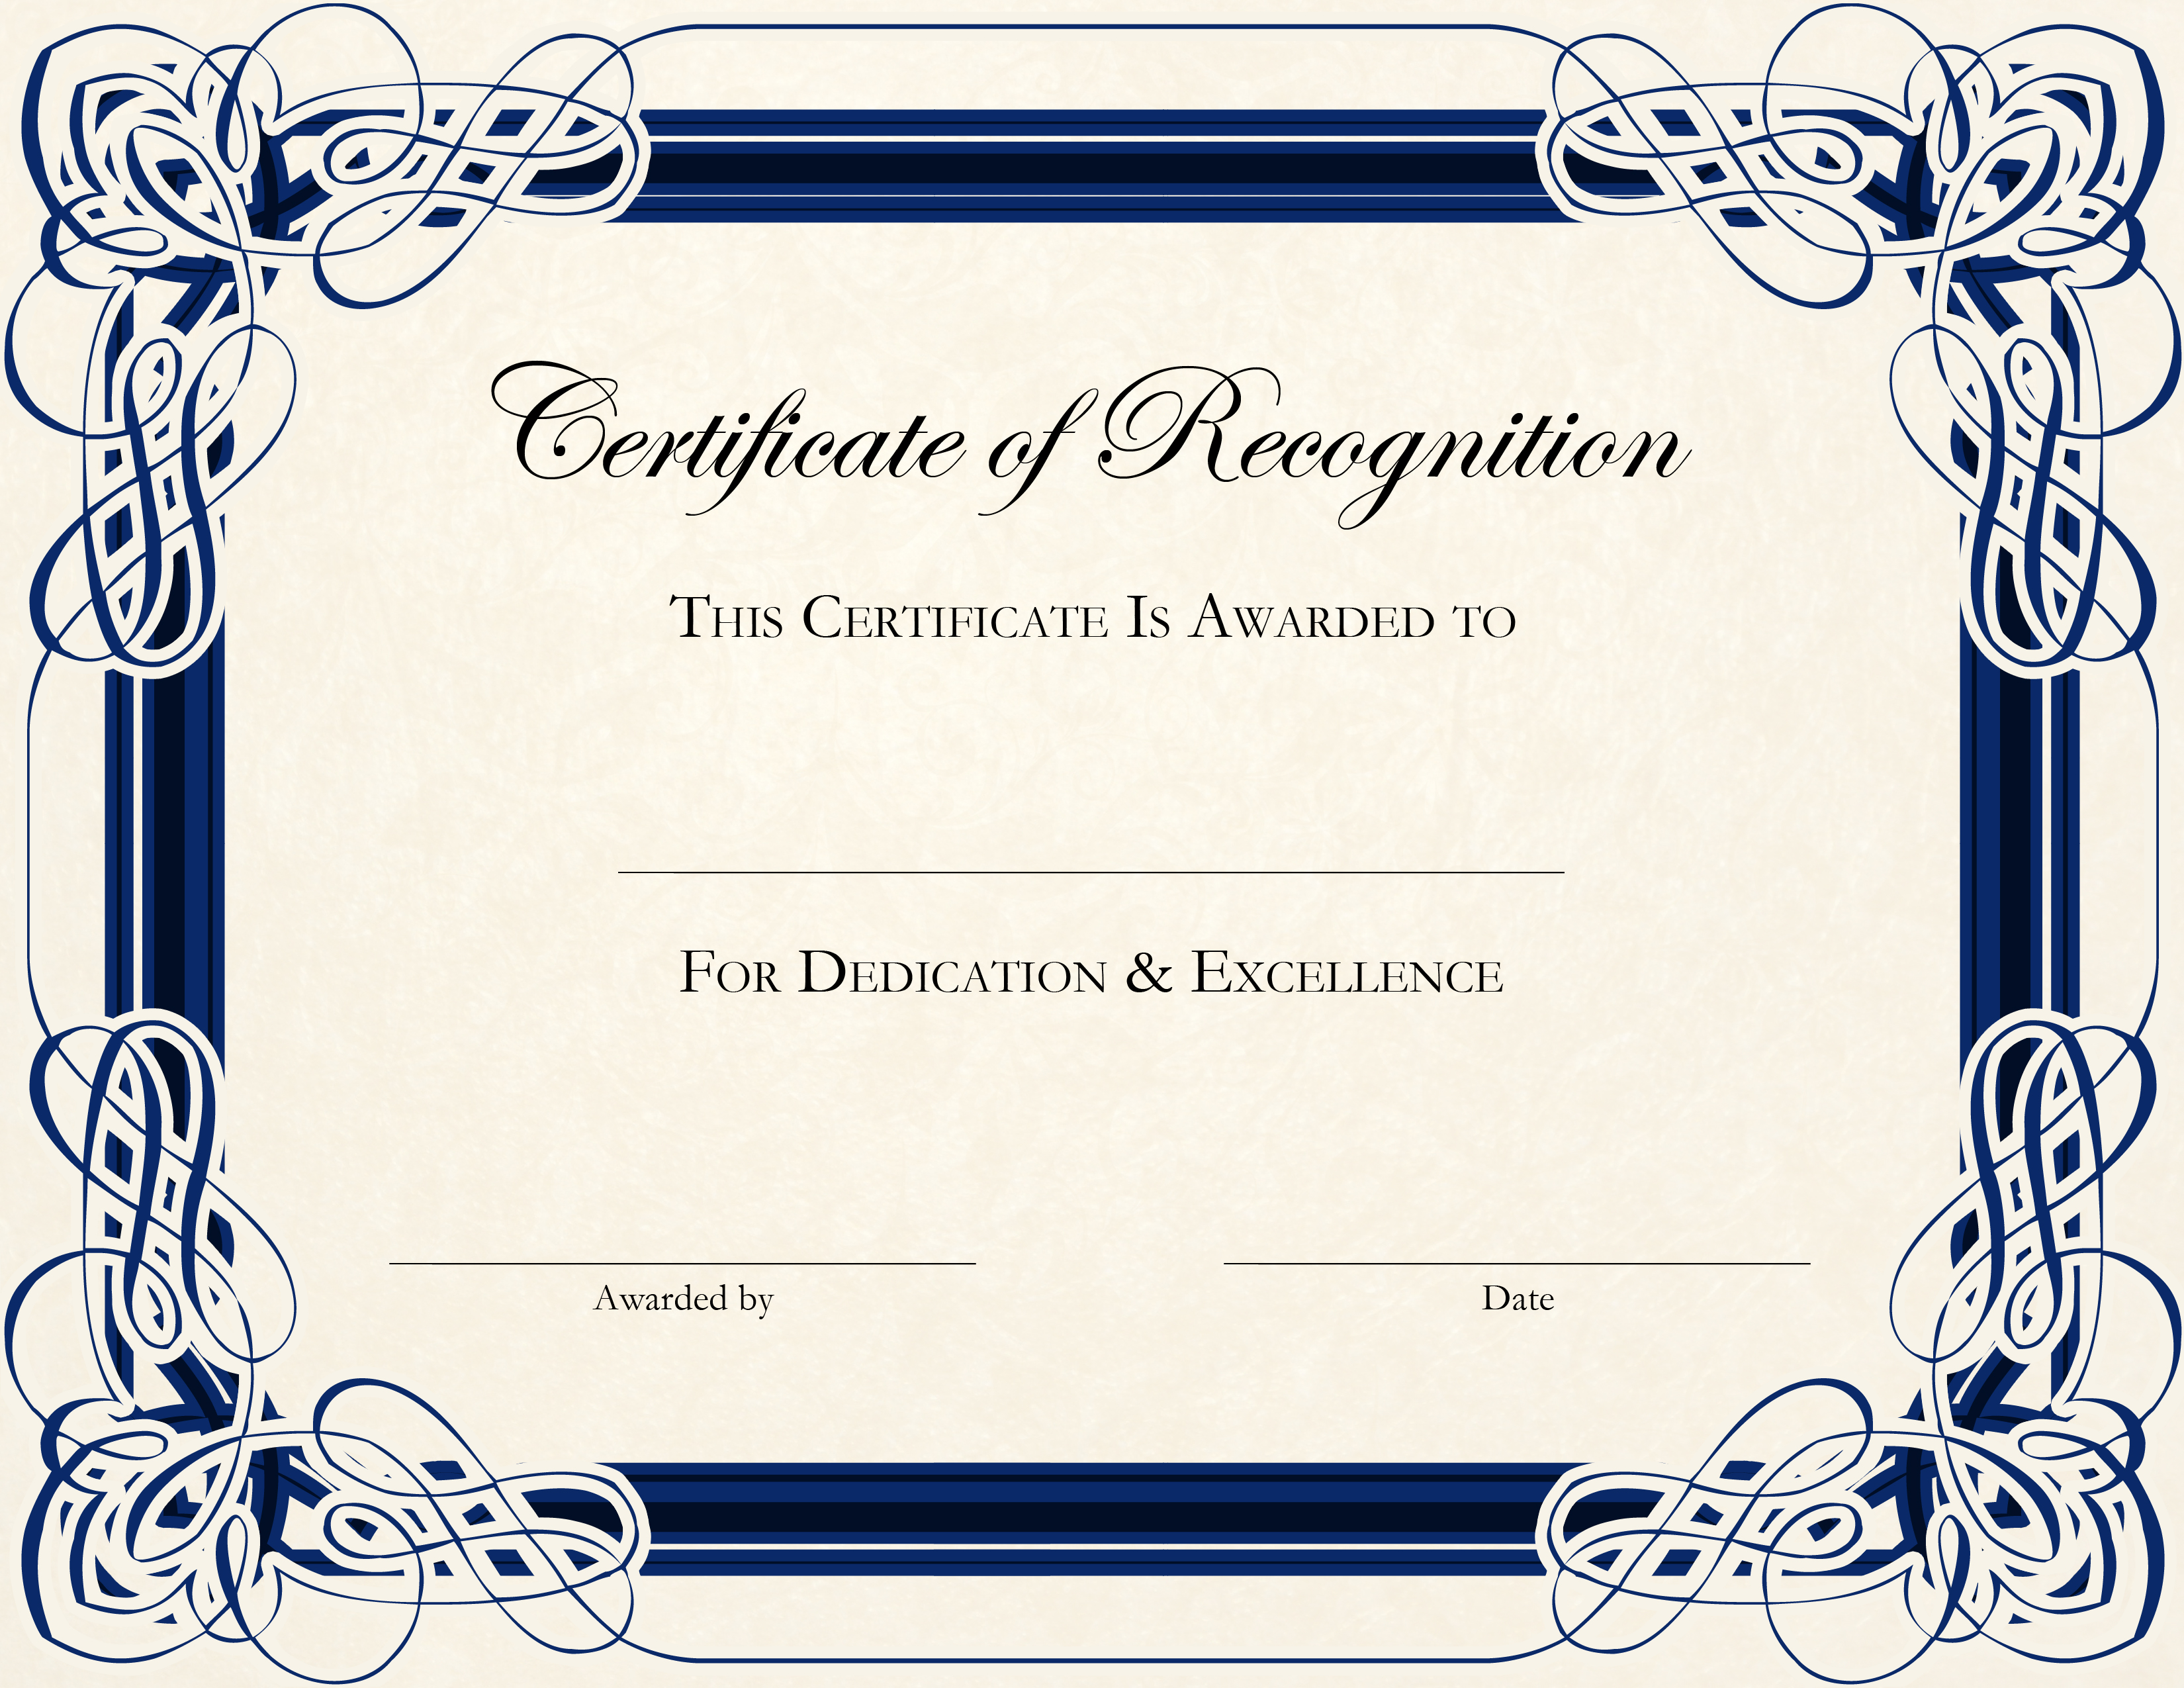 Certificate-of-Recognition-template